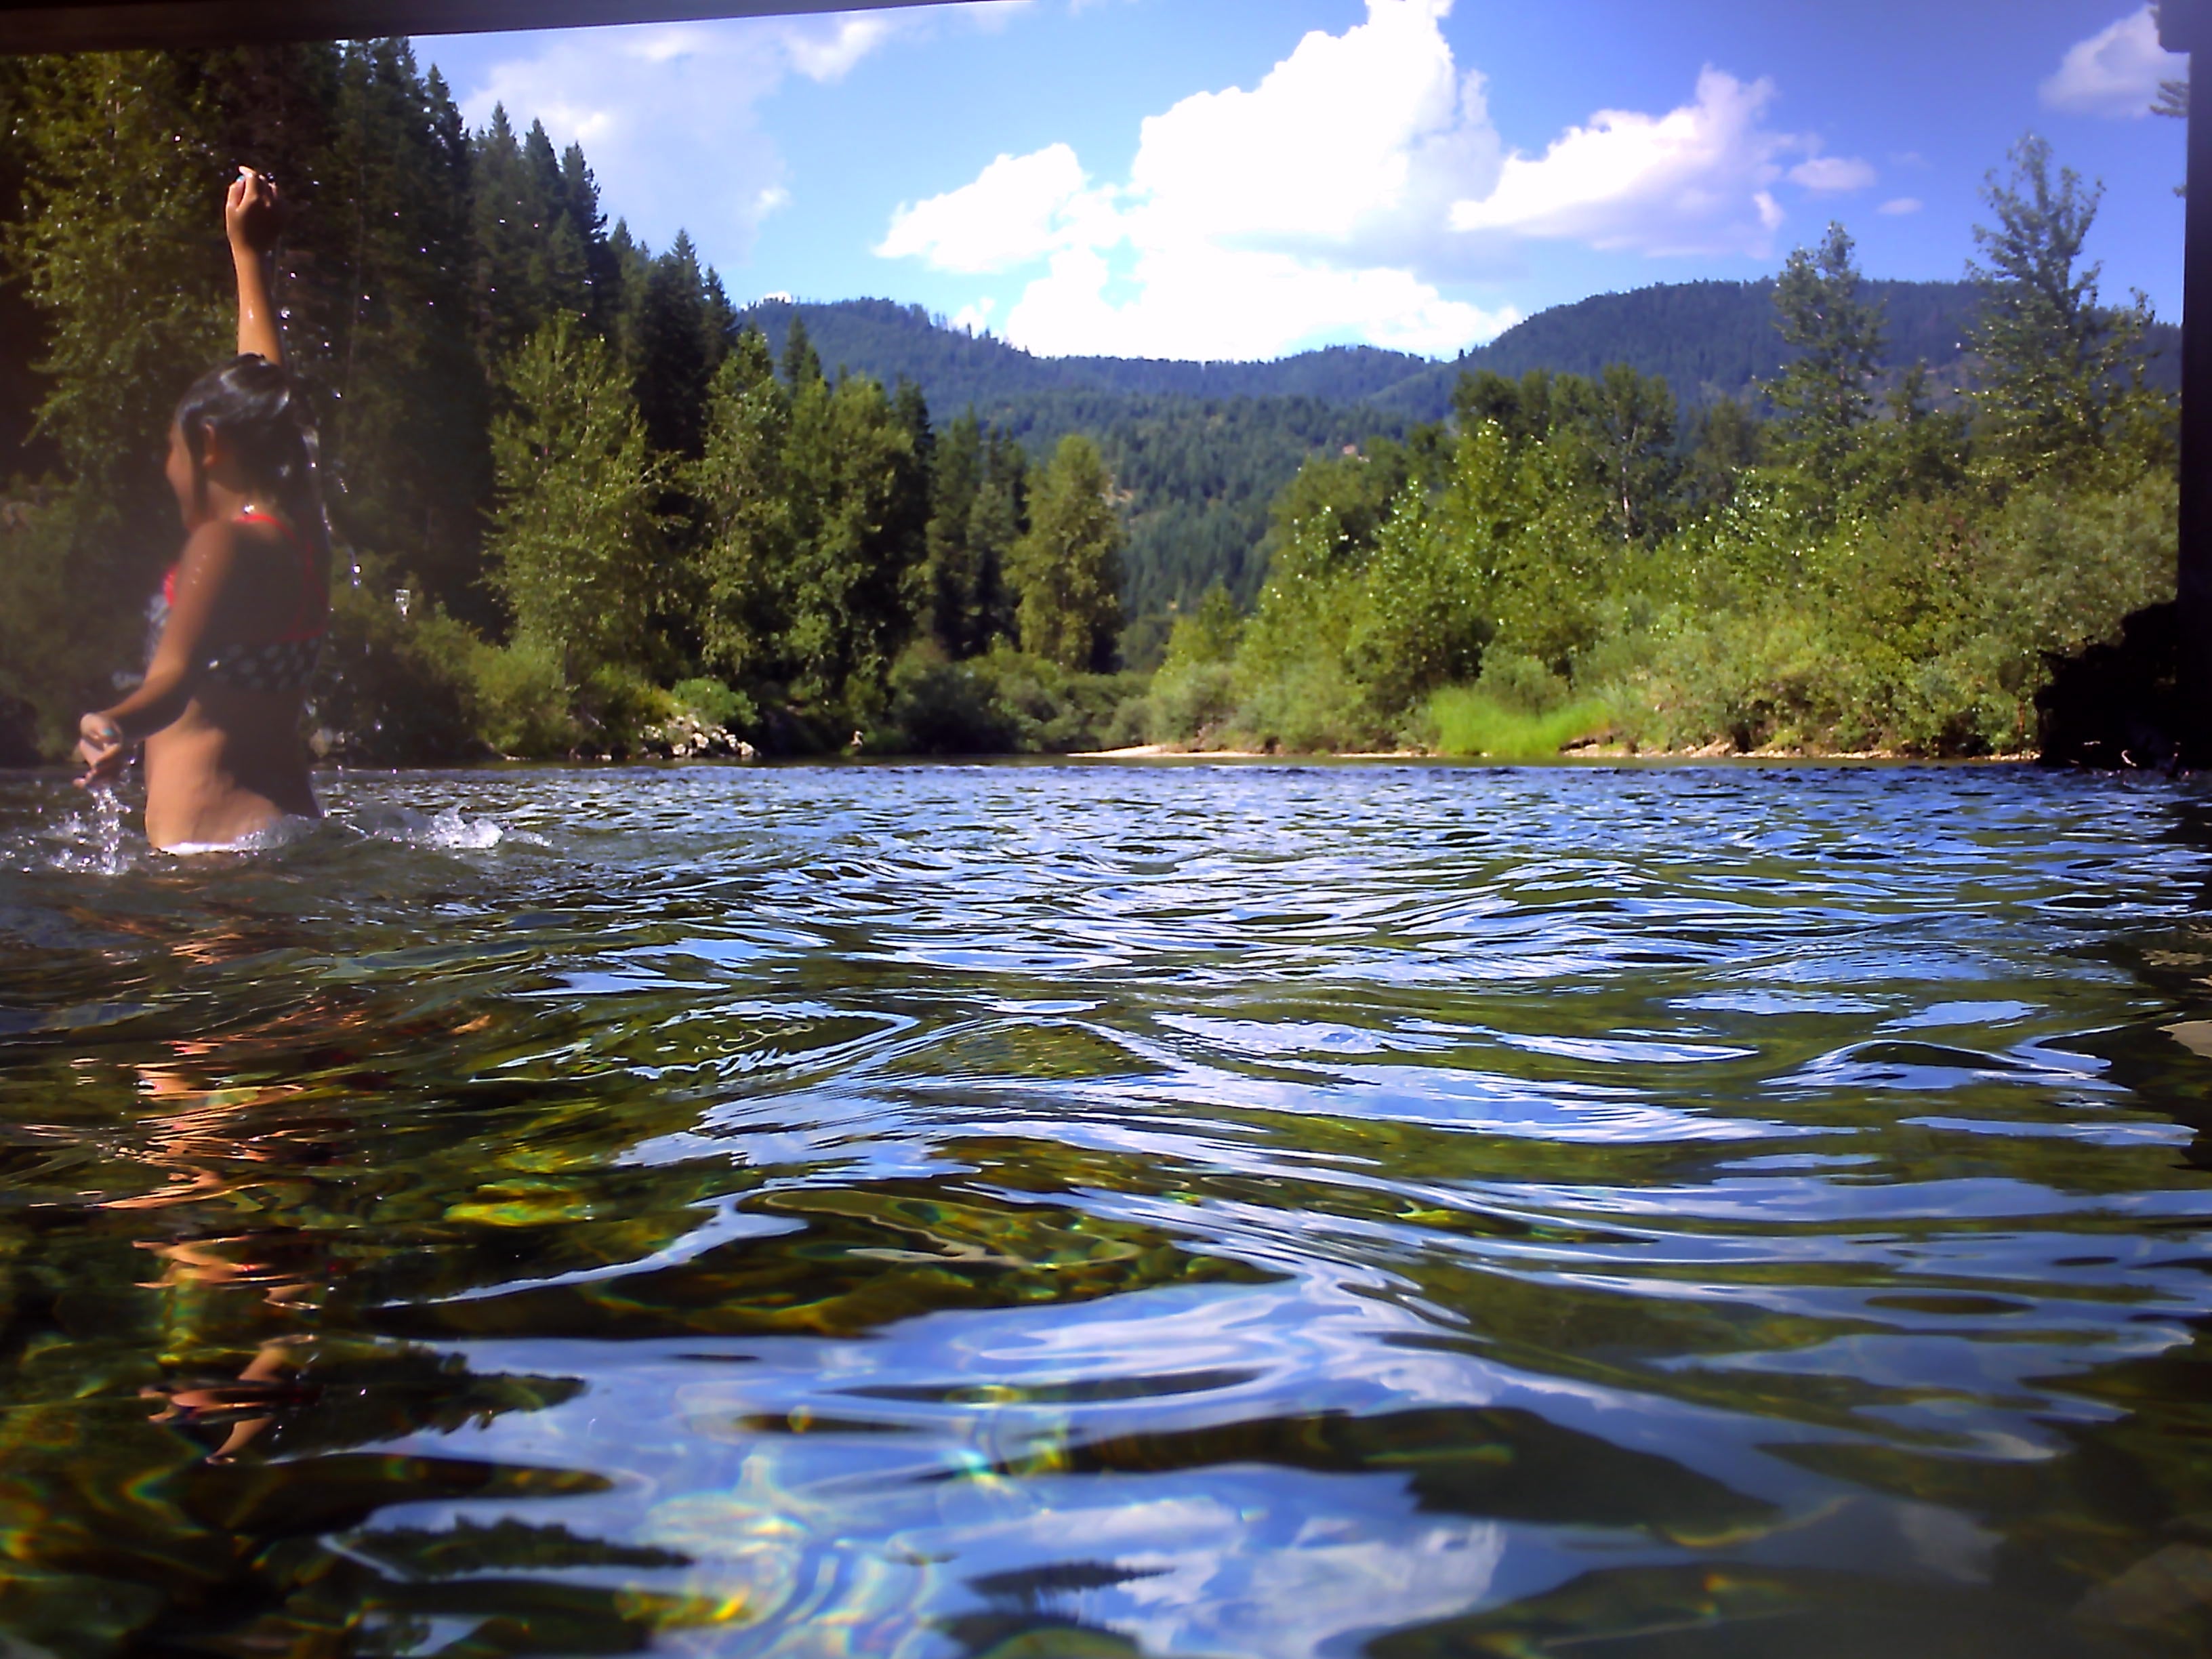 Swimming at the Bumblebee Bridge North Fork of the Coeur d'Alene River